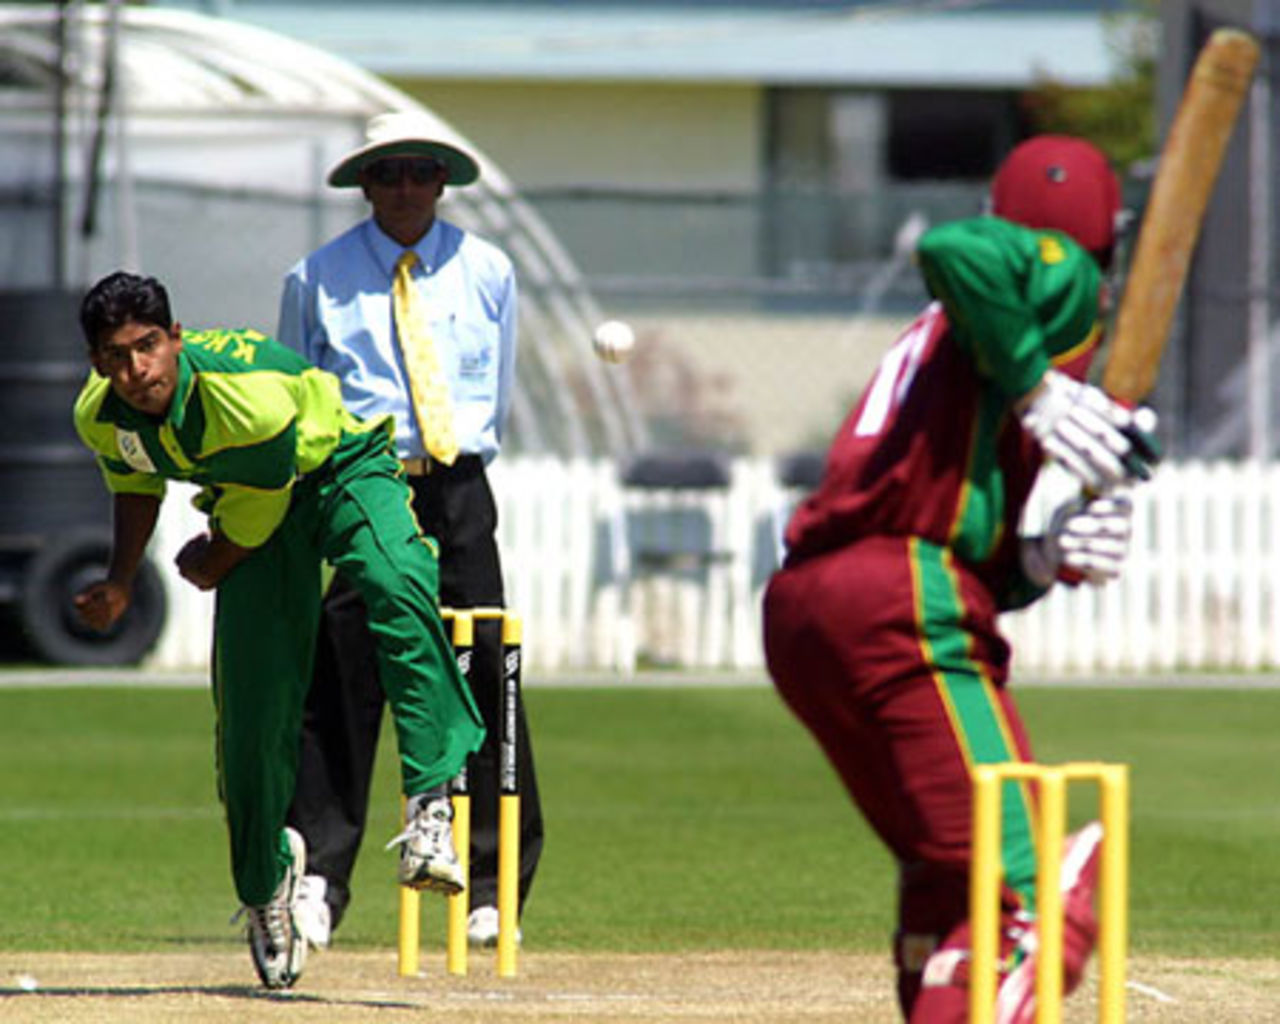 Pakistan Under-19 bowler Mohammad Khalil delivers a ball to West Indies Under-19 batsman Donovan Pagon during his spell of 0-34 from 10 overs. Umpire Asoka de Silva from Sri Lanka looks on. ICC Under-19 World Cup Super League Group 1: Pakistan Under-19s v West Indies Under-19s at Lincoln Green, Lincoln, 29 January 2002.